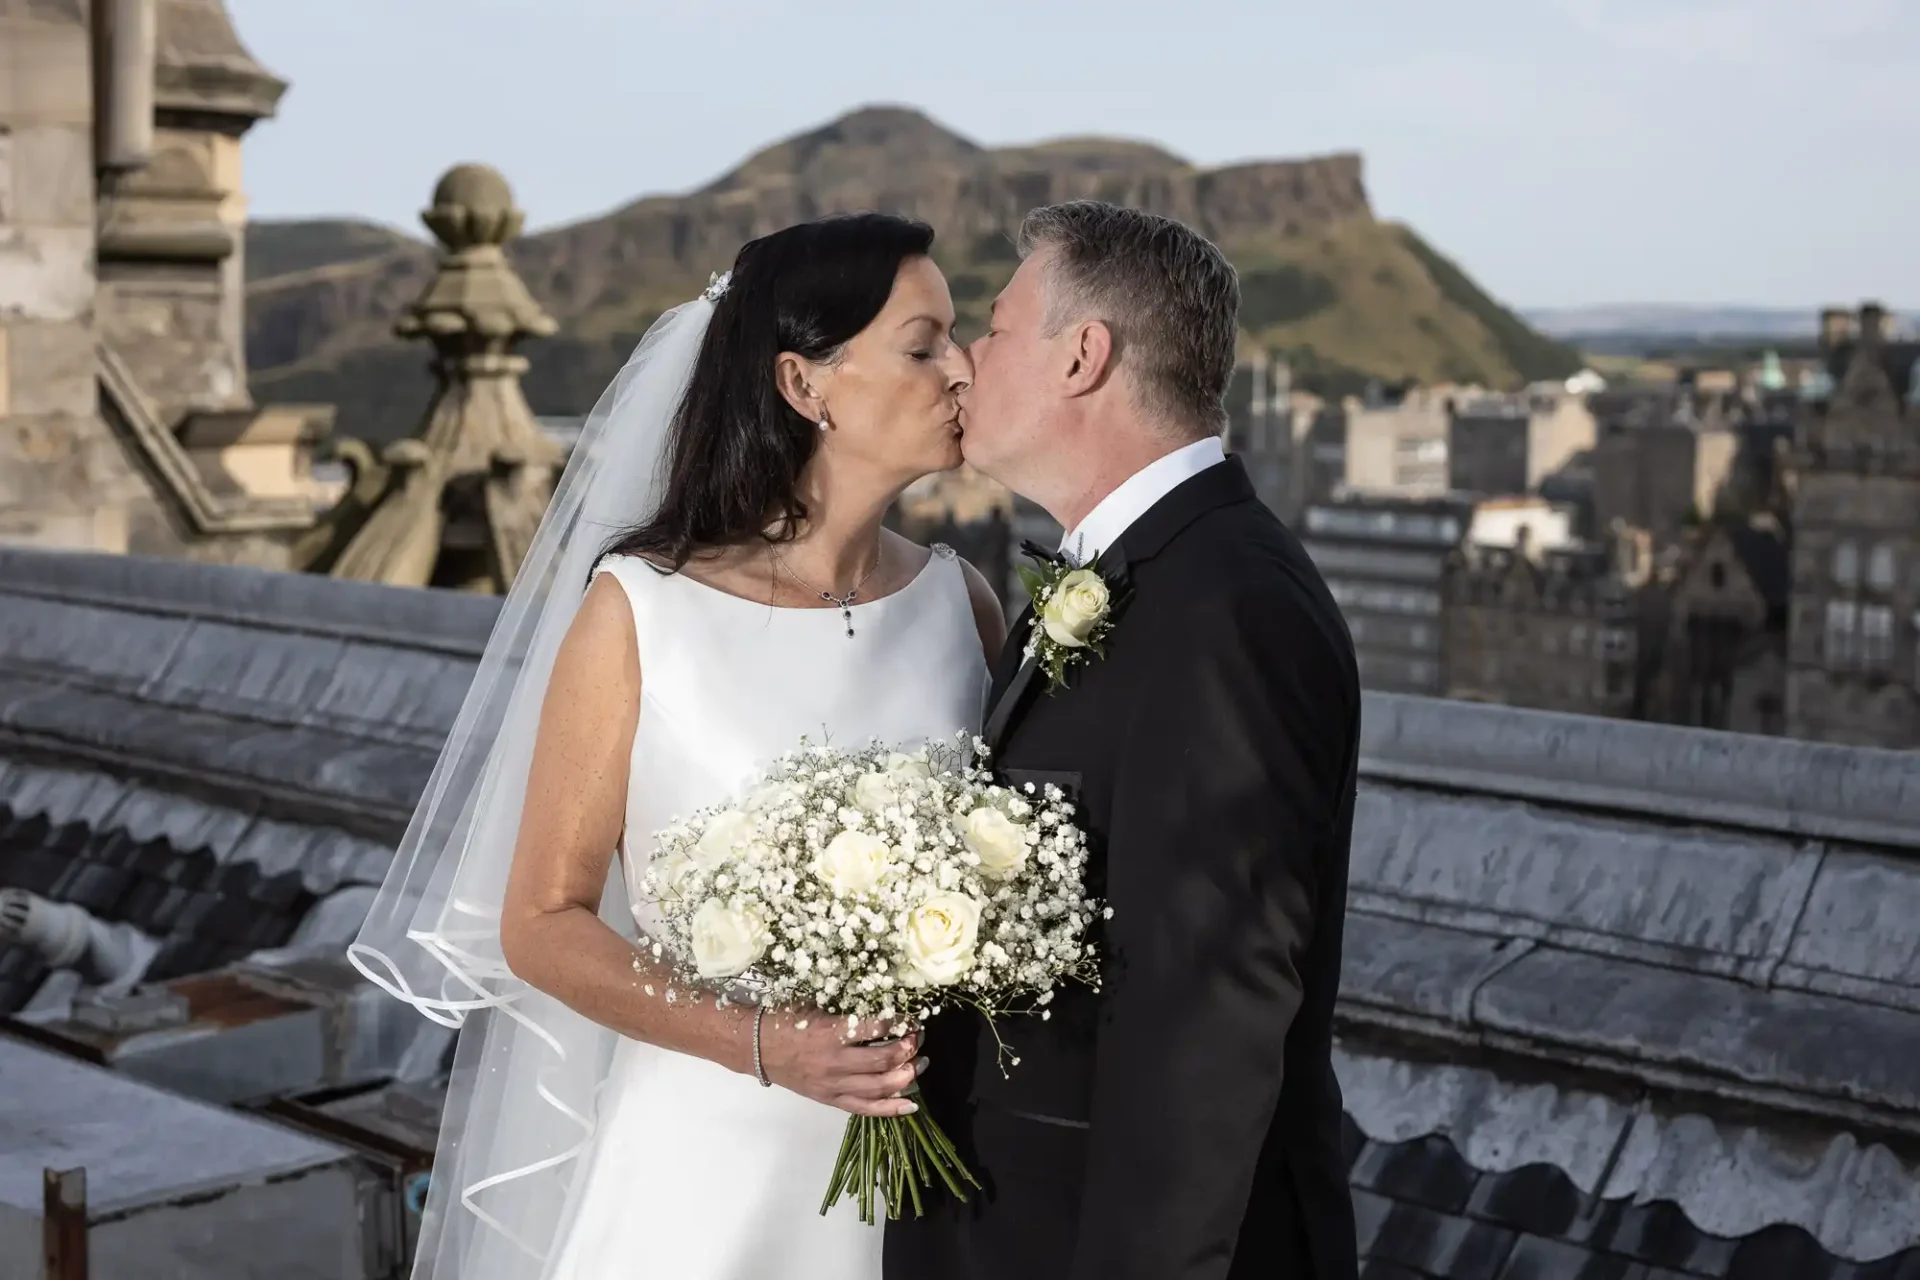 A bride and groom kissing on a rooftop, with a large bouquet and a cityscape featuring a hill in the background.